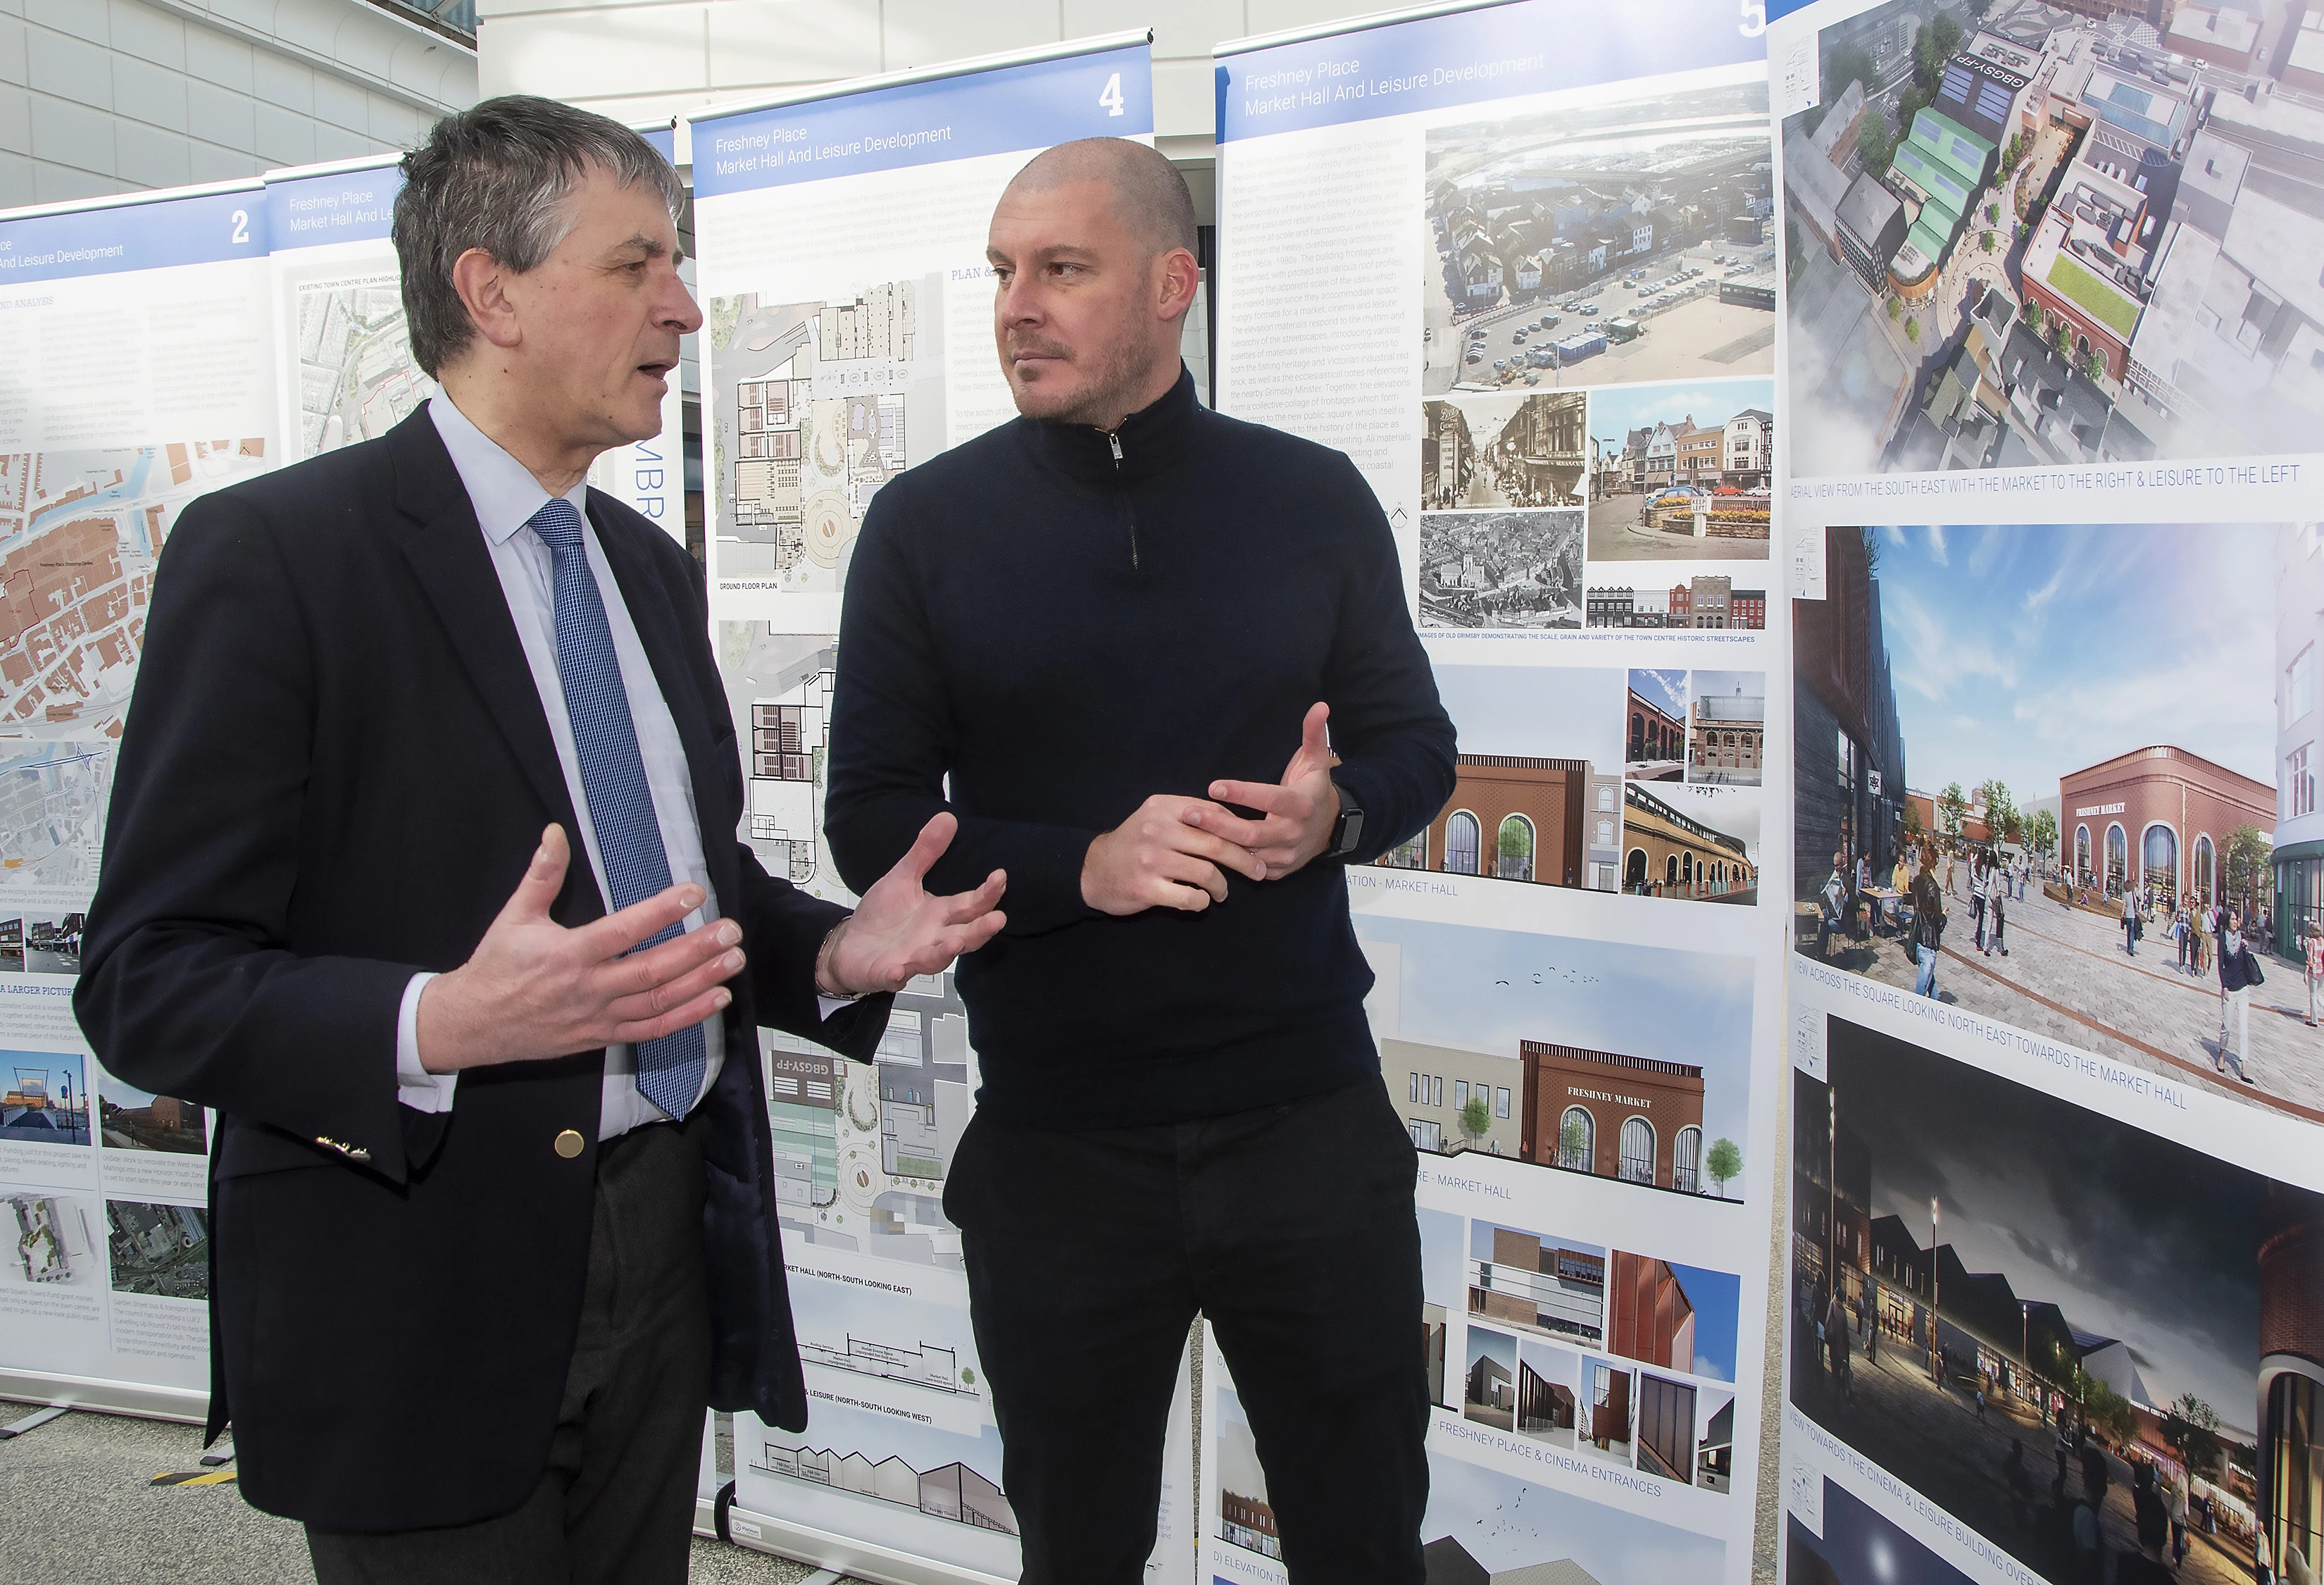 Looking at the new plans for the western end of Freshney Place and visiting the centre is North East Lincolnshire Council Leader Cllr Philip Jackson with Ben Hall representing the main contractor for the scheme Morgan Sindall.